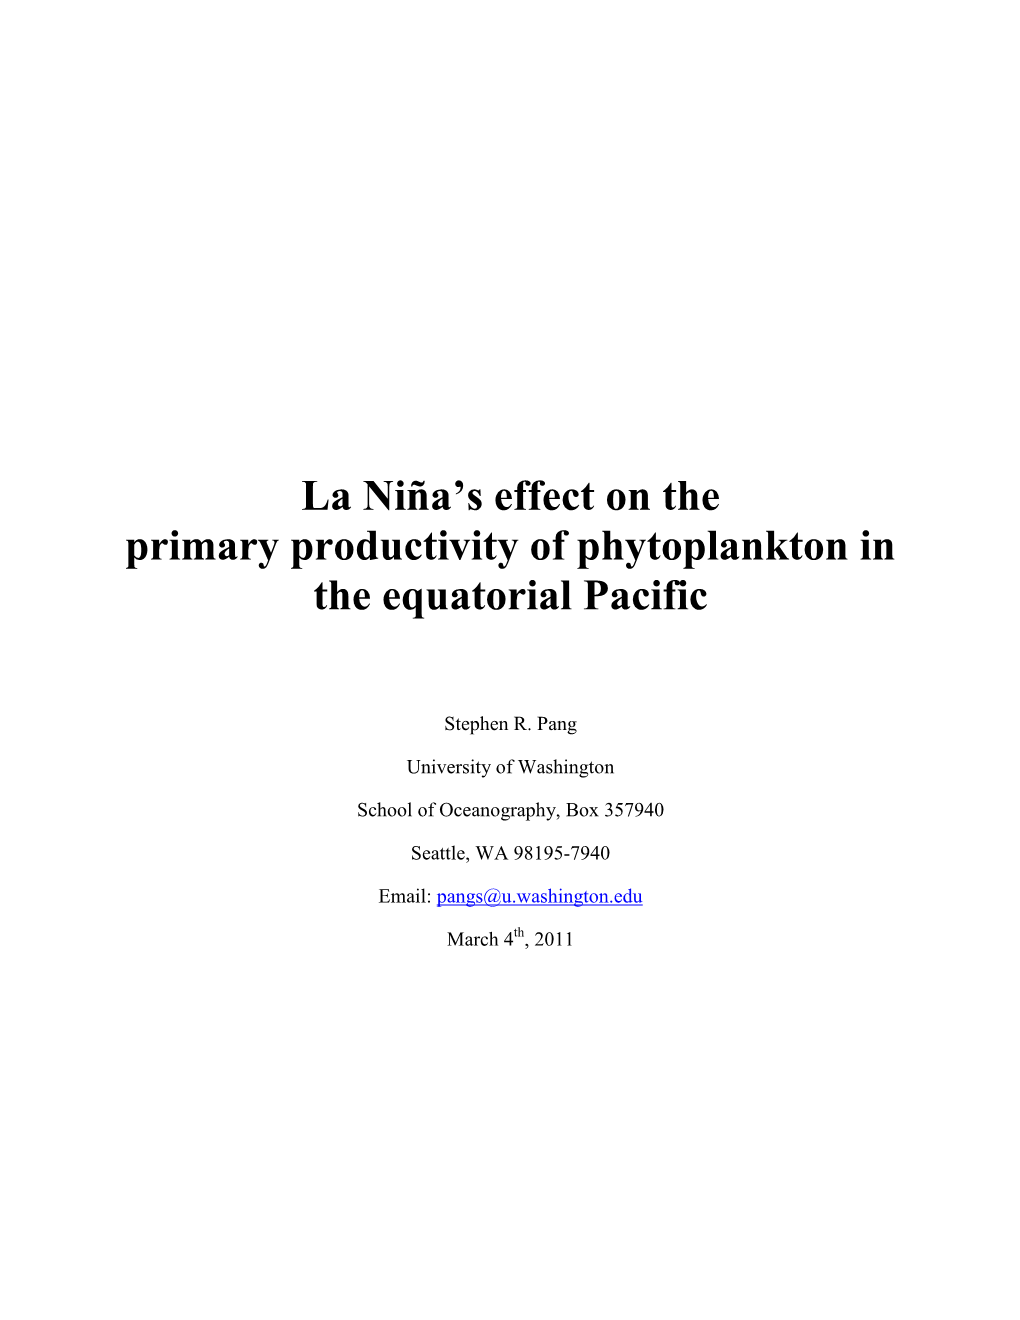 La Niña's Effect on the Primary Productivity of Phytoplankton in The